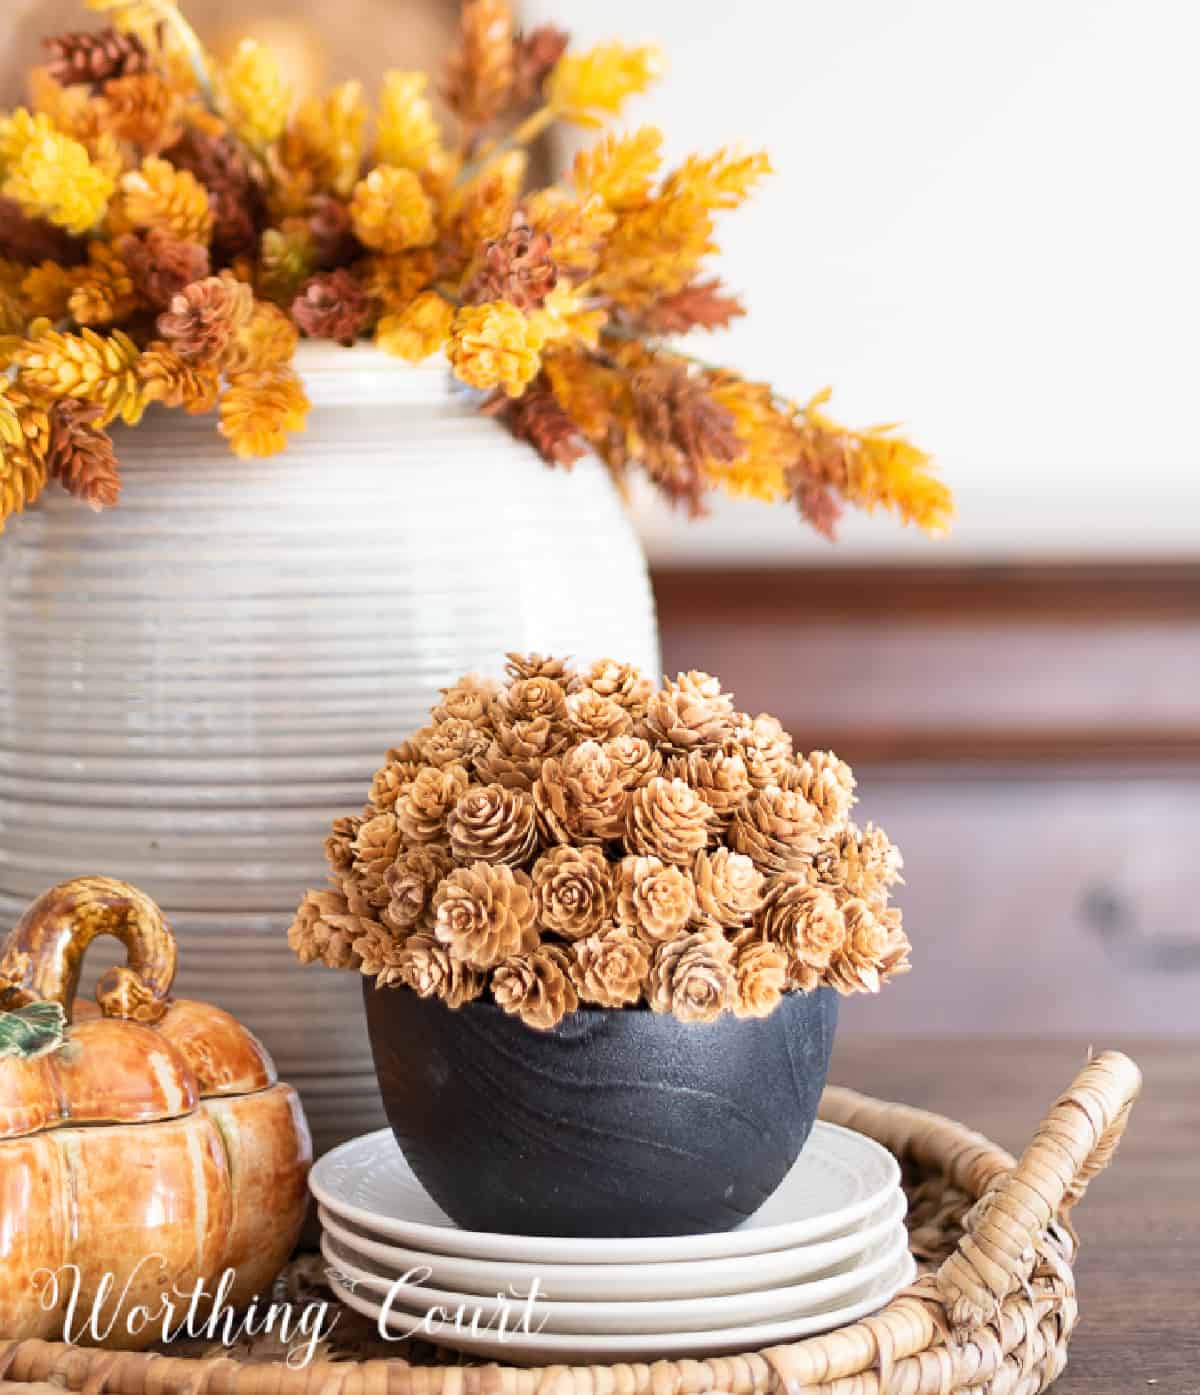 Thanksgiving centerpiece with a vase of fall stems, porcelain pumpkin box and small pinecone arrangement in a round wicker tray